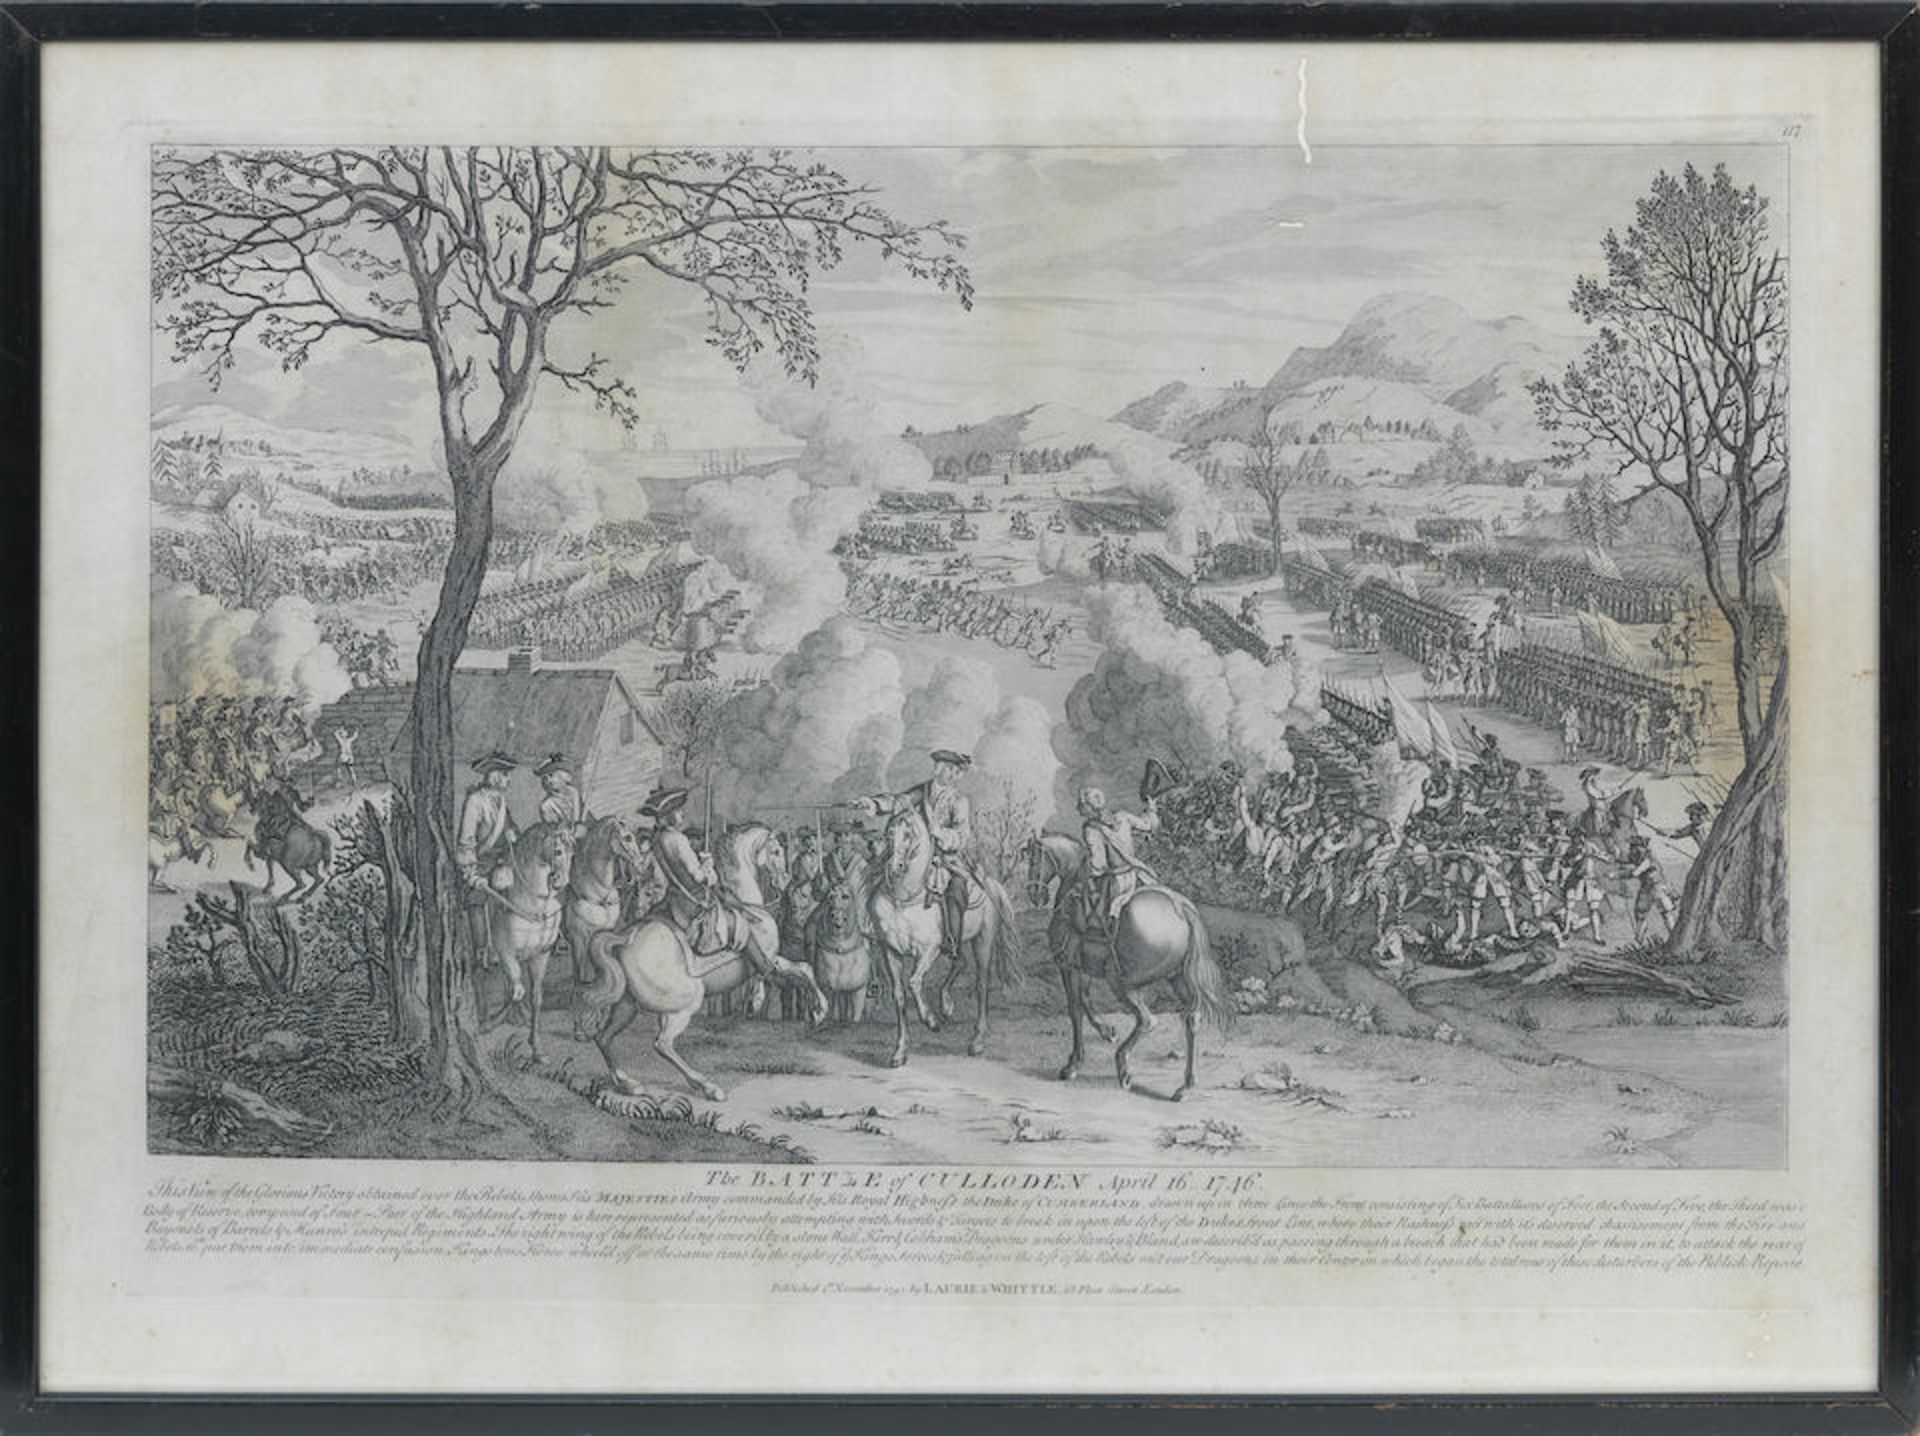 An engraved view of the Battle of Culloden Published by Laurie & Whittle, 1797 38 x 50cm (14 15/... - Image 16 of 21